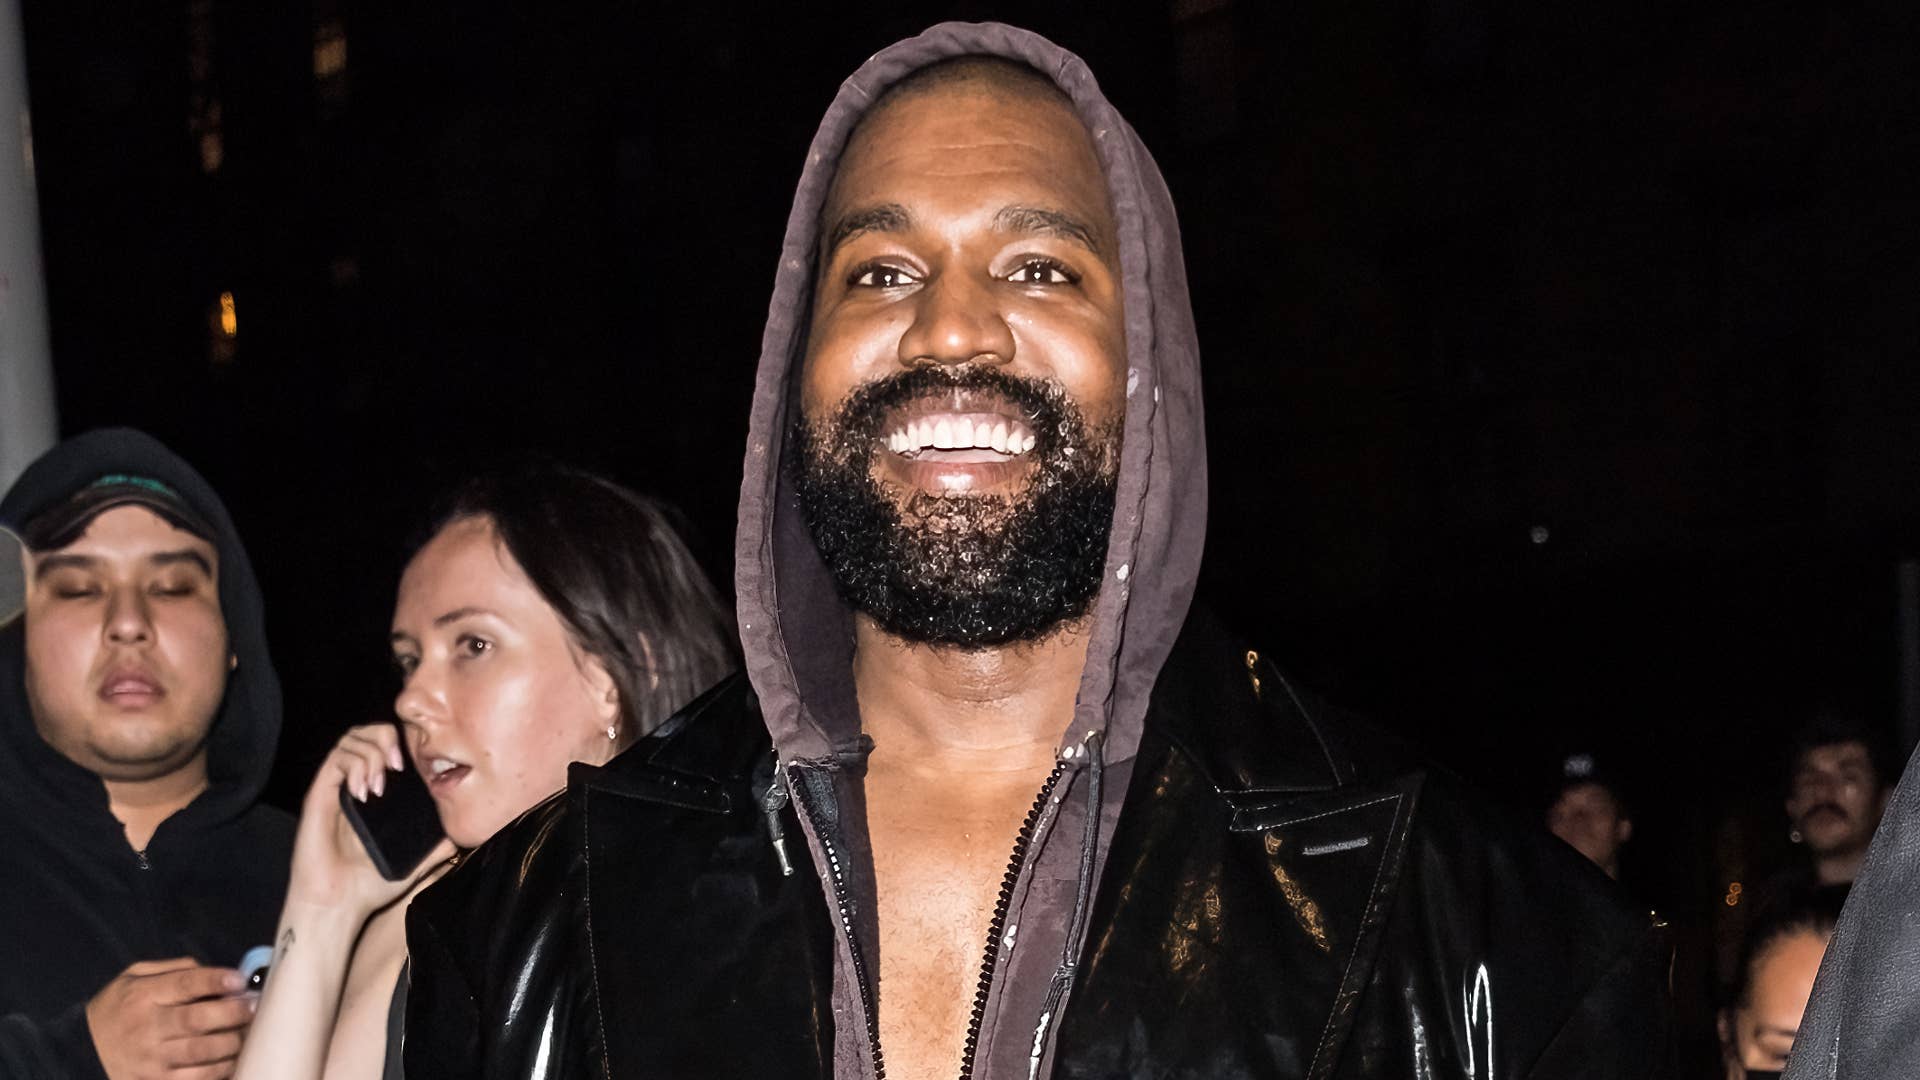 Ye is seen smiling while out and about in the city